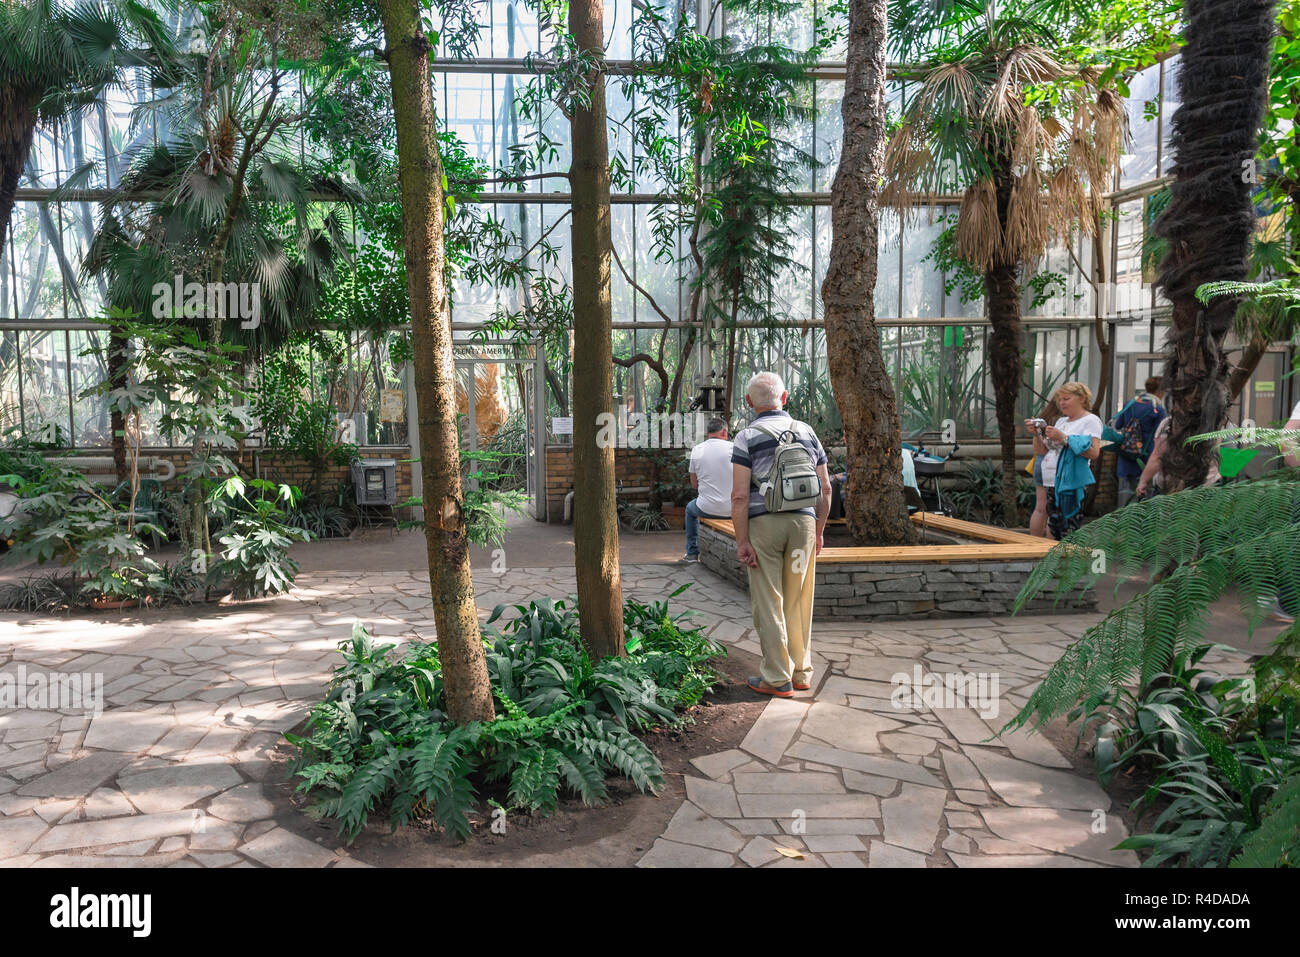 Poznan Palm House, view inside the Palm House in Poznan showing people surrounded by tropical trees and foliage, Poznan, Poland. Stock Photo